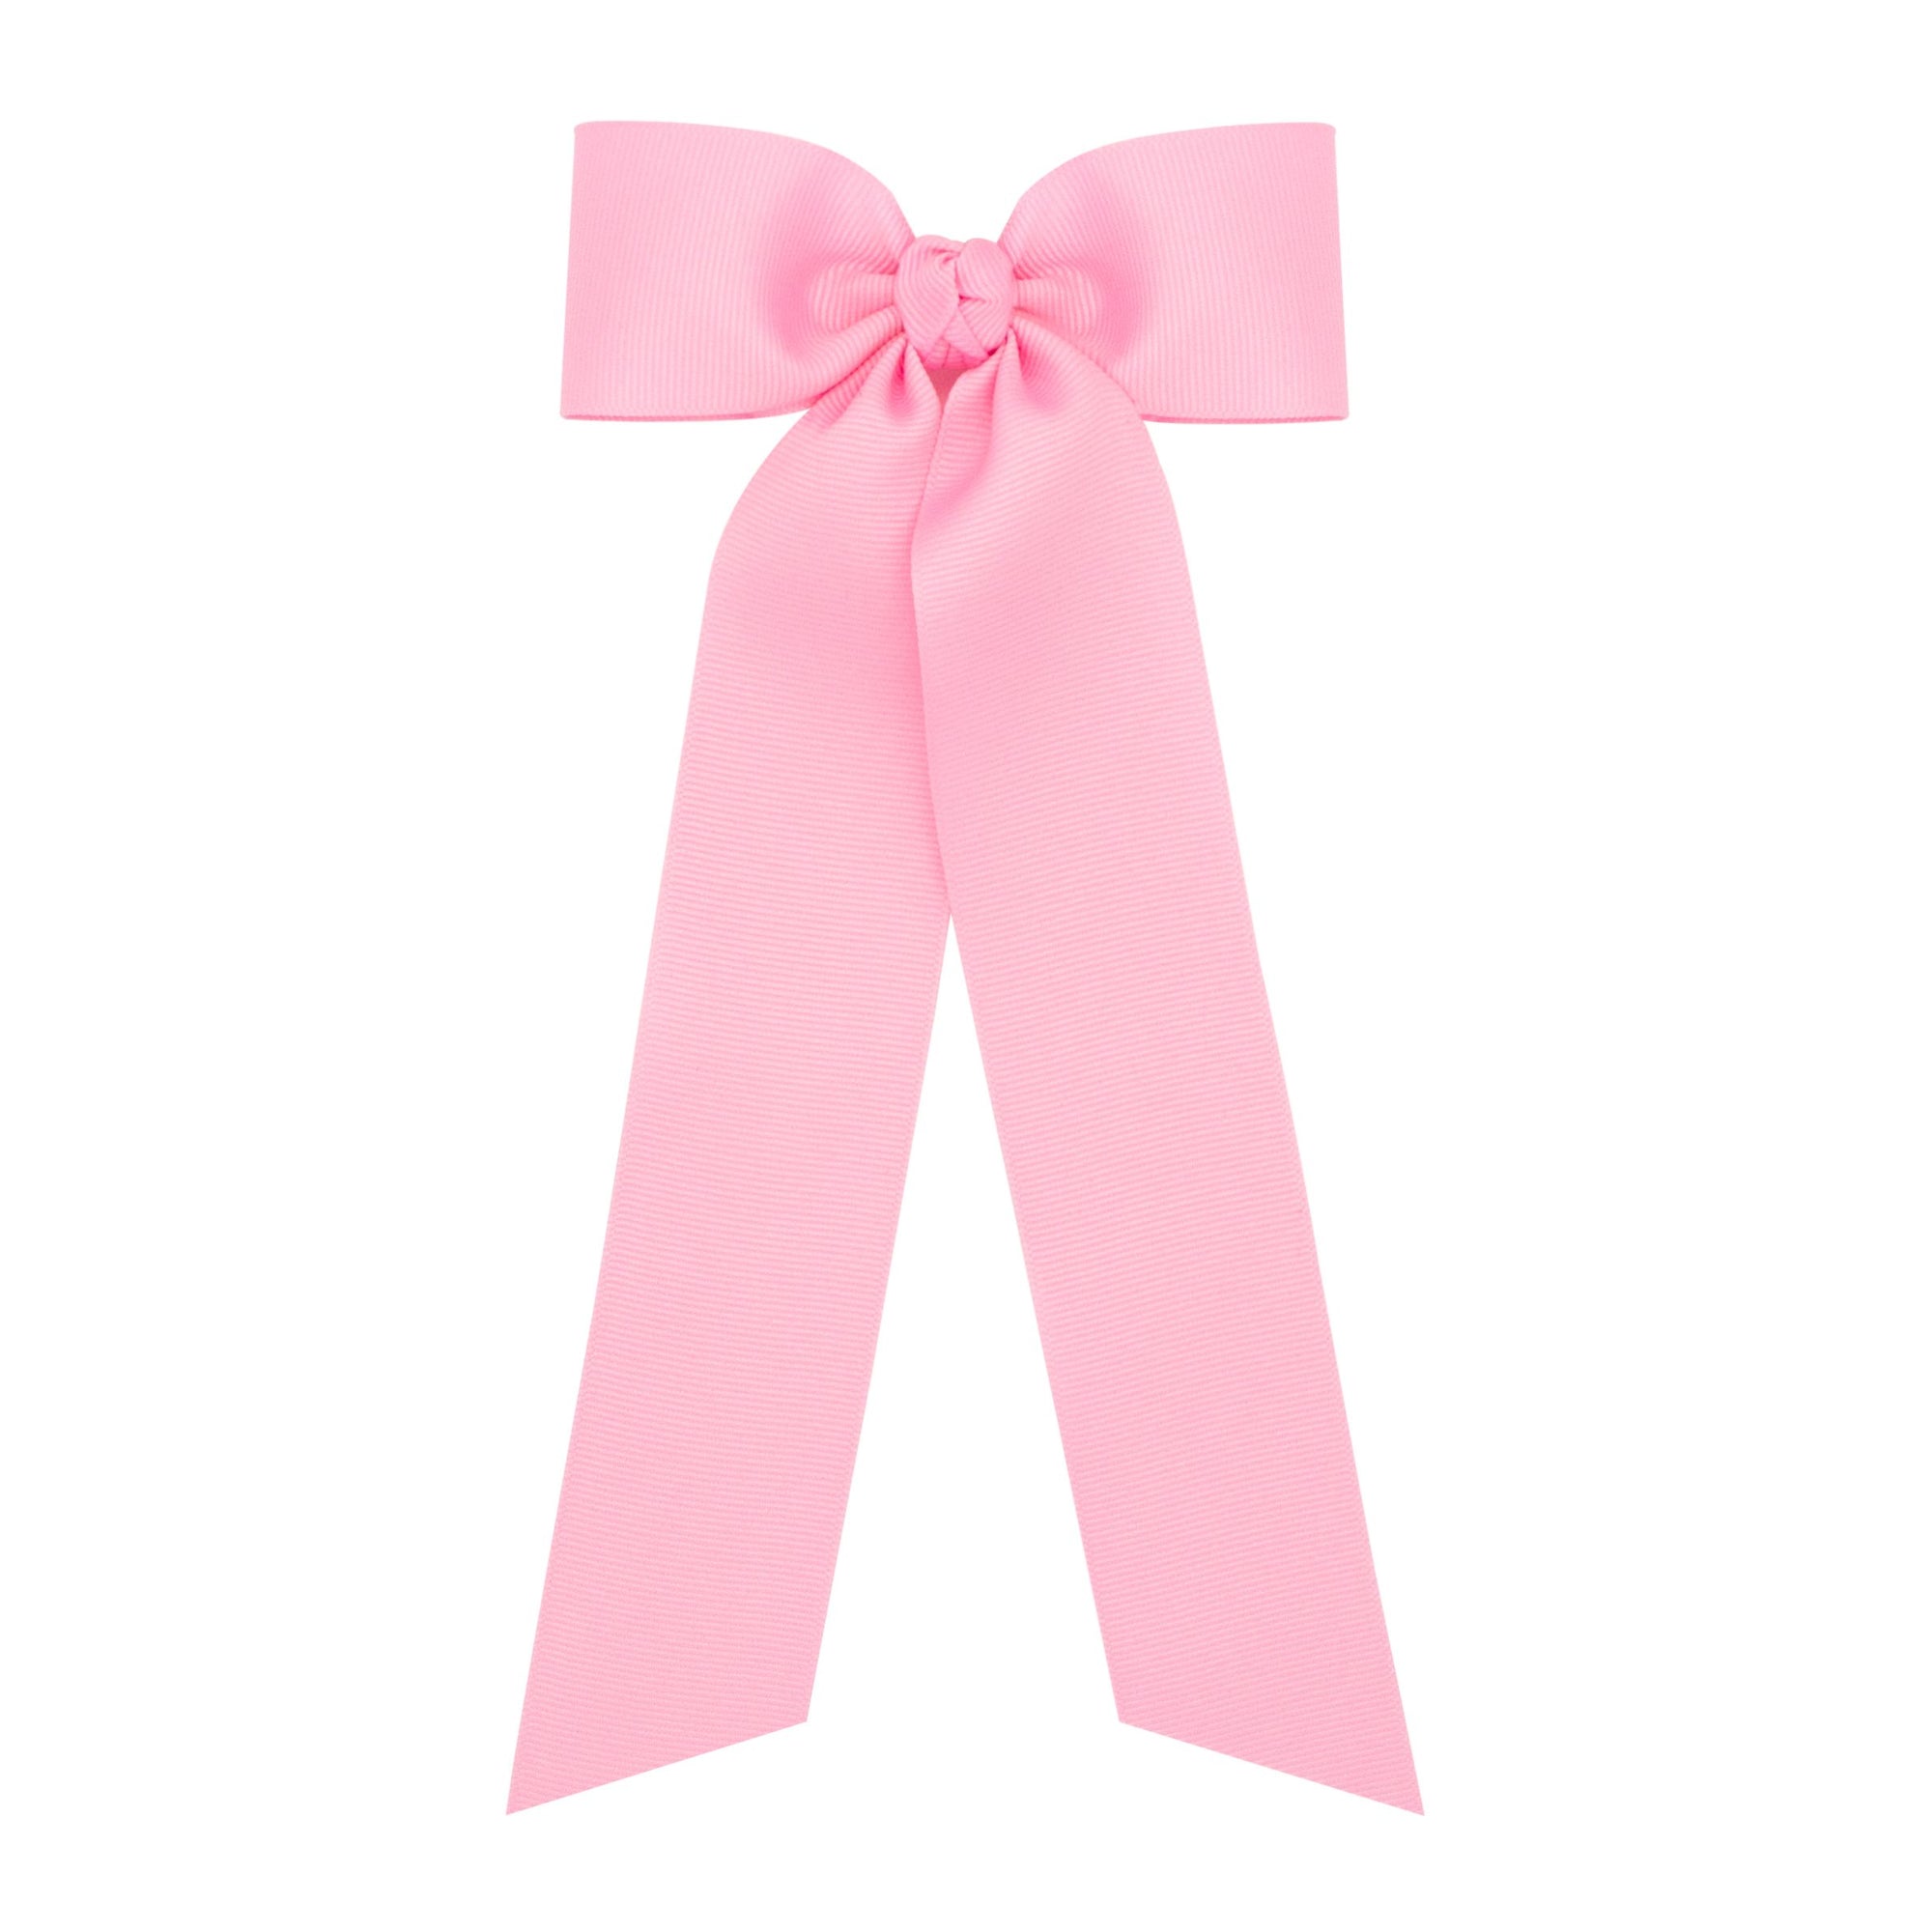 wee ones: Medium Grosgrain Hair Bowtie with Knot Wrap and Streamer Tails - Pearl